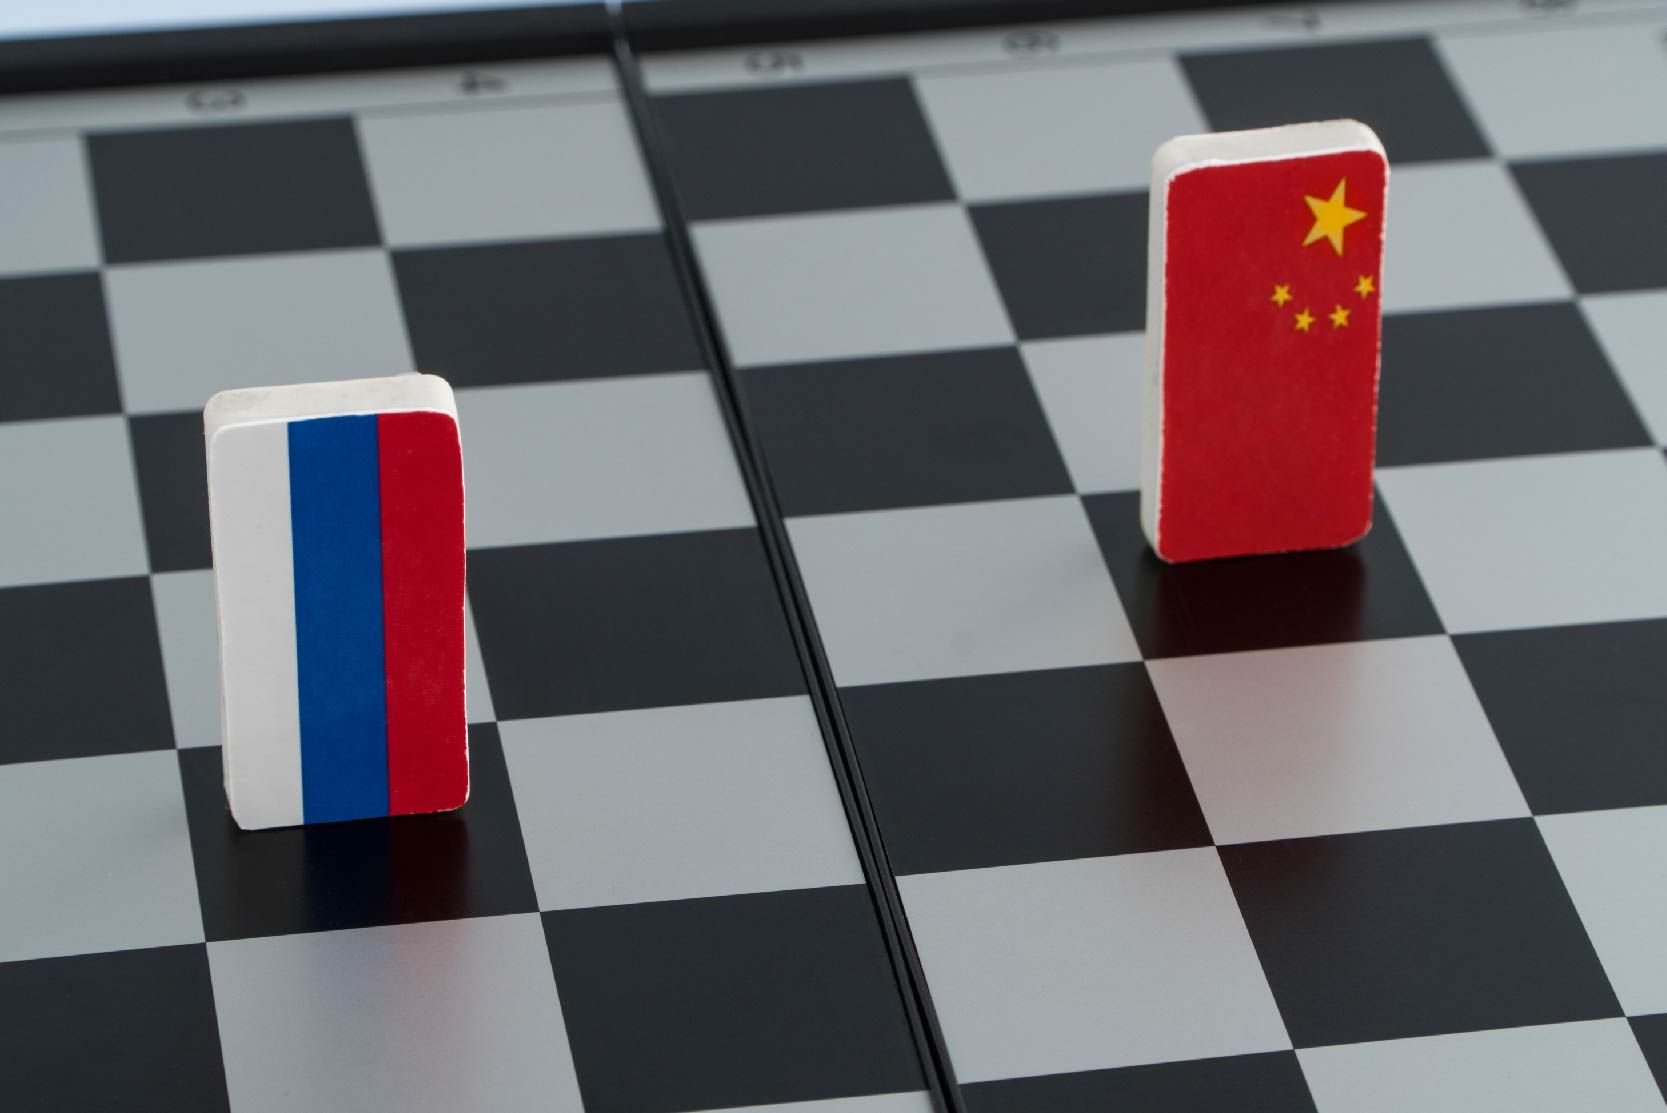 Russia does not intend to follow in China's footsteps in cryptocurrency restrictions